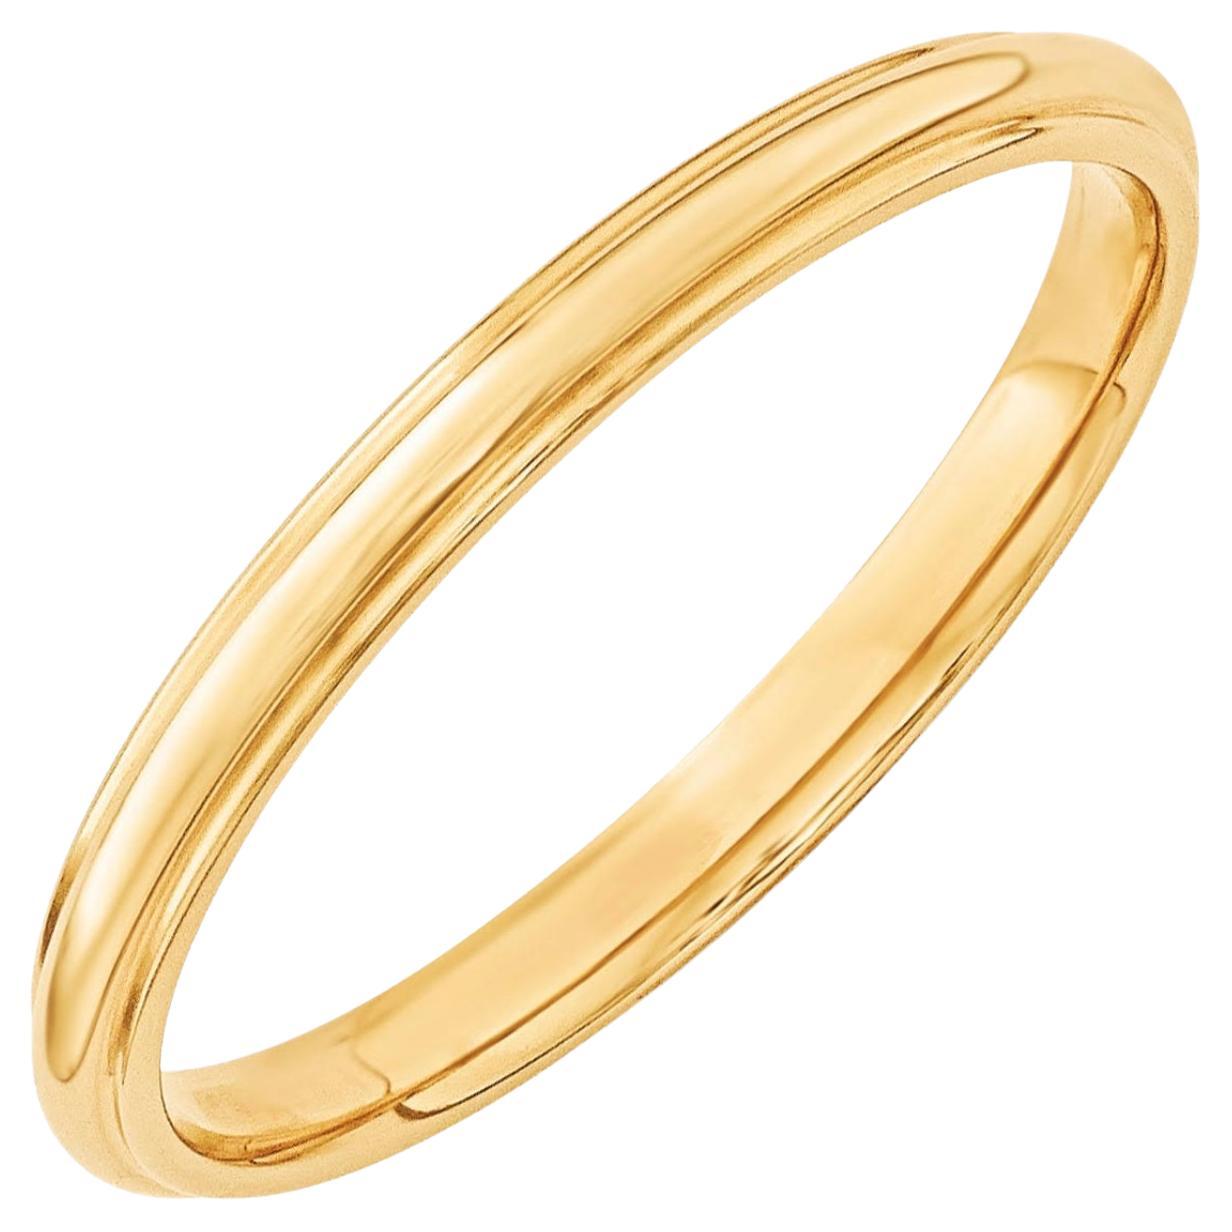 
 14 Karat Yellow Gold Half Round Classic Wedding Band Solid Ring Size 5.75
This timeless style adds a Light classic  band. Quality craftsmanship makes this long lasting band a great value. rounded inside edge for increased comfort.
High